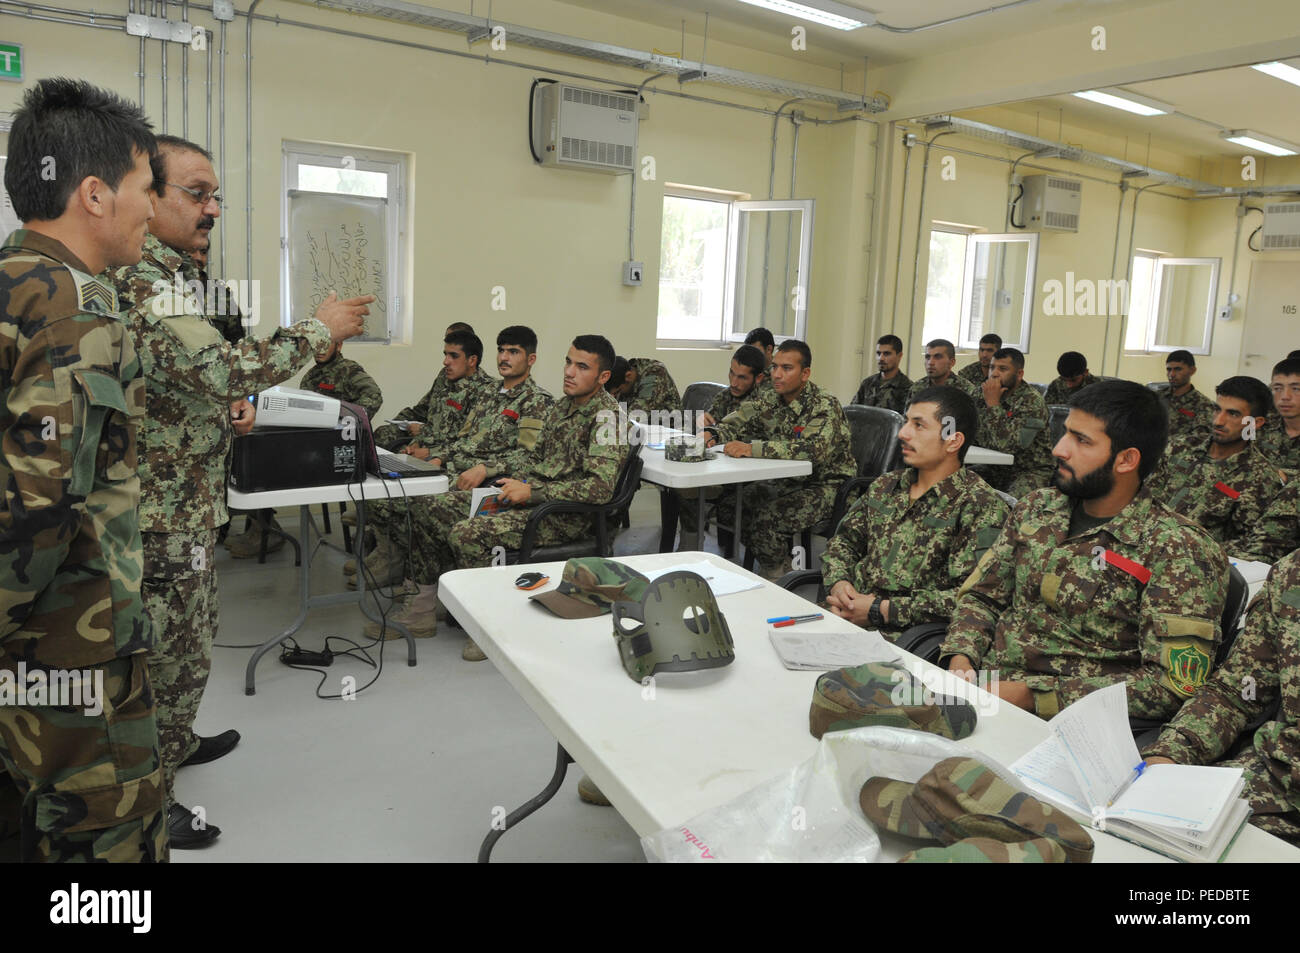 KANDAHAR, Afghanistan (Aug. 8, 2015) Afghan National Army 205th Corps Maj. Nisar Ahmad, commander of Kandahar Regional Military Hospital medical training facilities located at Camp Hero, Afghanistan, addresses new physician assistant students during a class. The Afghan-led training provides a solid foundation to successfully work at KRMH, the most capable Afghan medical facility within Kandahar and Helmand provinces. The ANA works closely with coalition advisors from Train, Advise and Assist Command - South to advance their capabilities to provide premium care for Afghan security forces as par Stock Photo